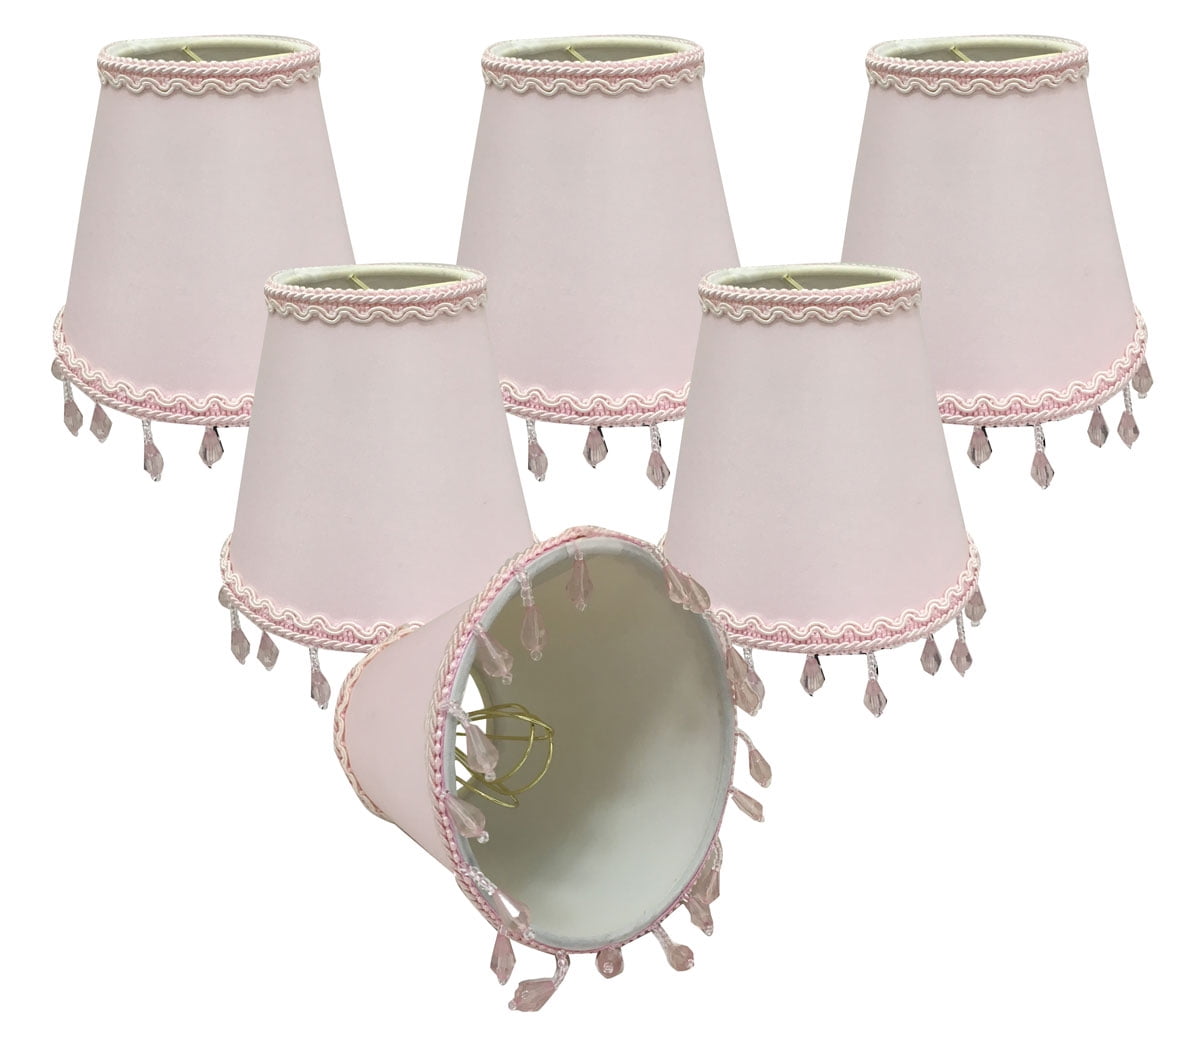 NEW chandelier mini lamp shade clip-on empire shape red/white 4.5" tall w/ bulb 